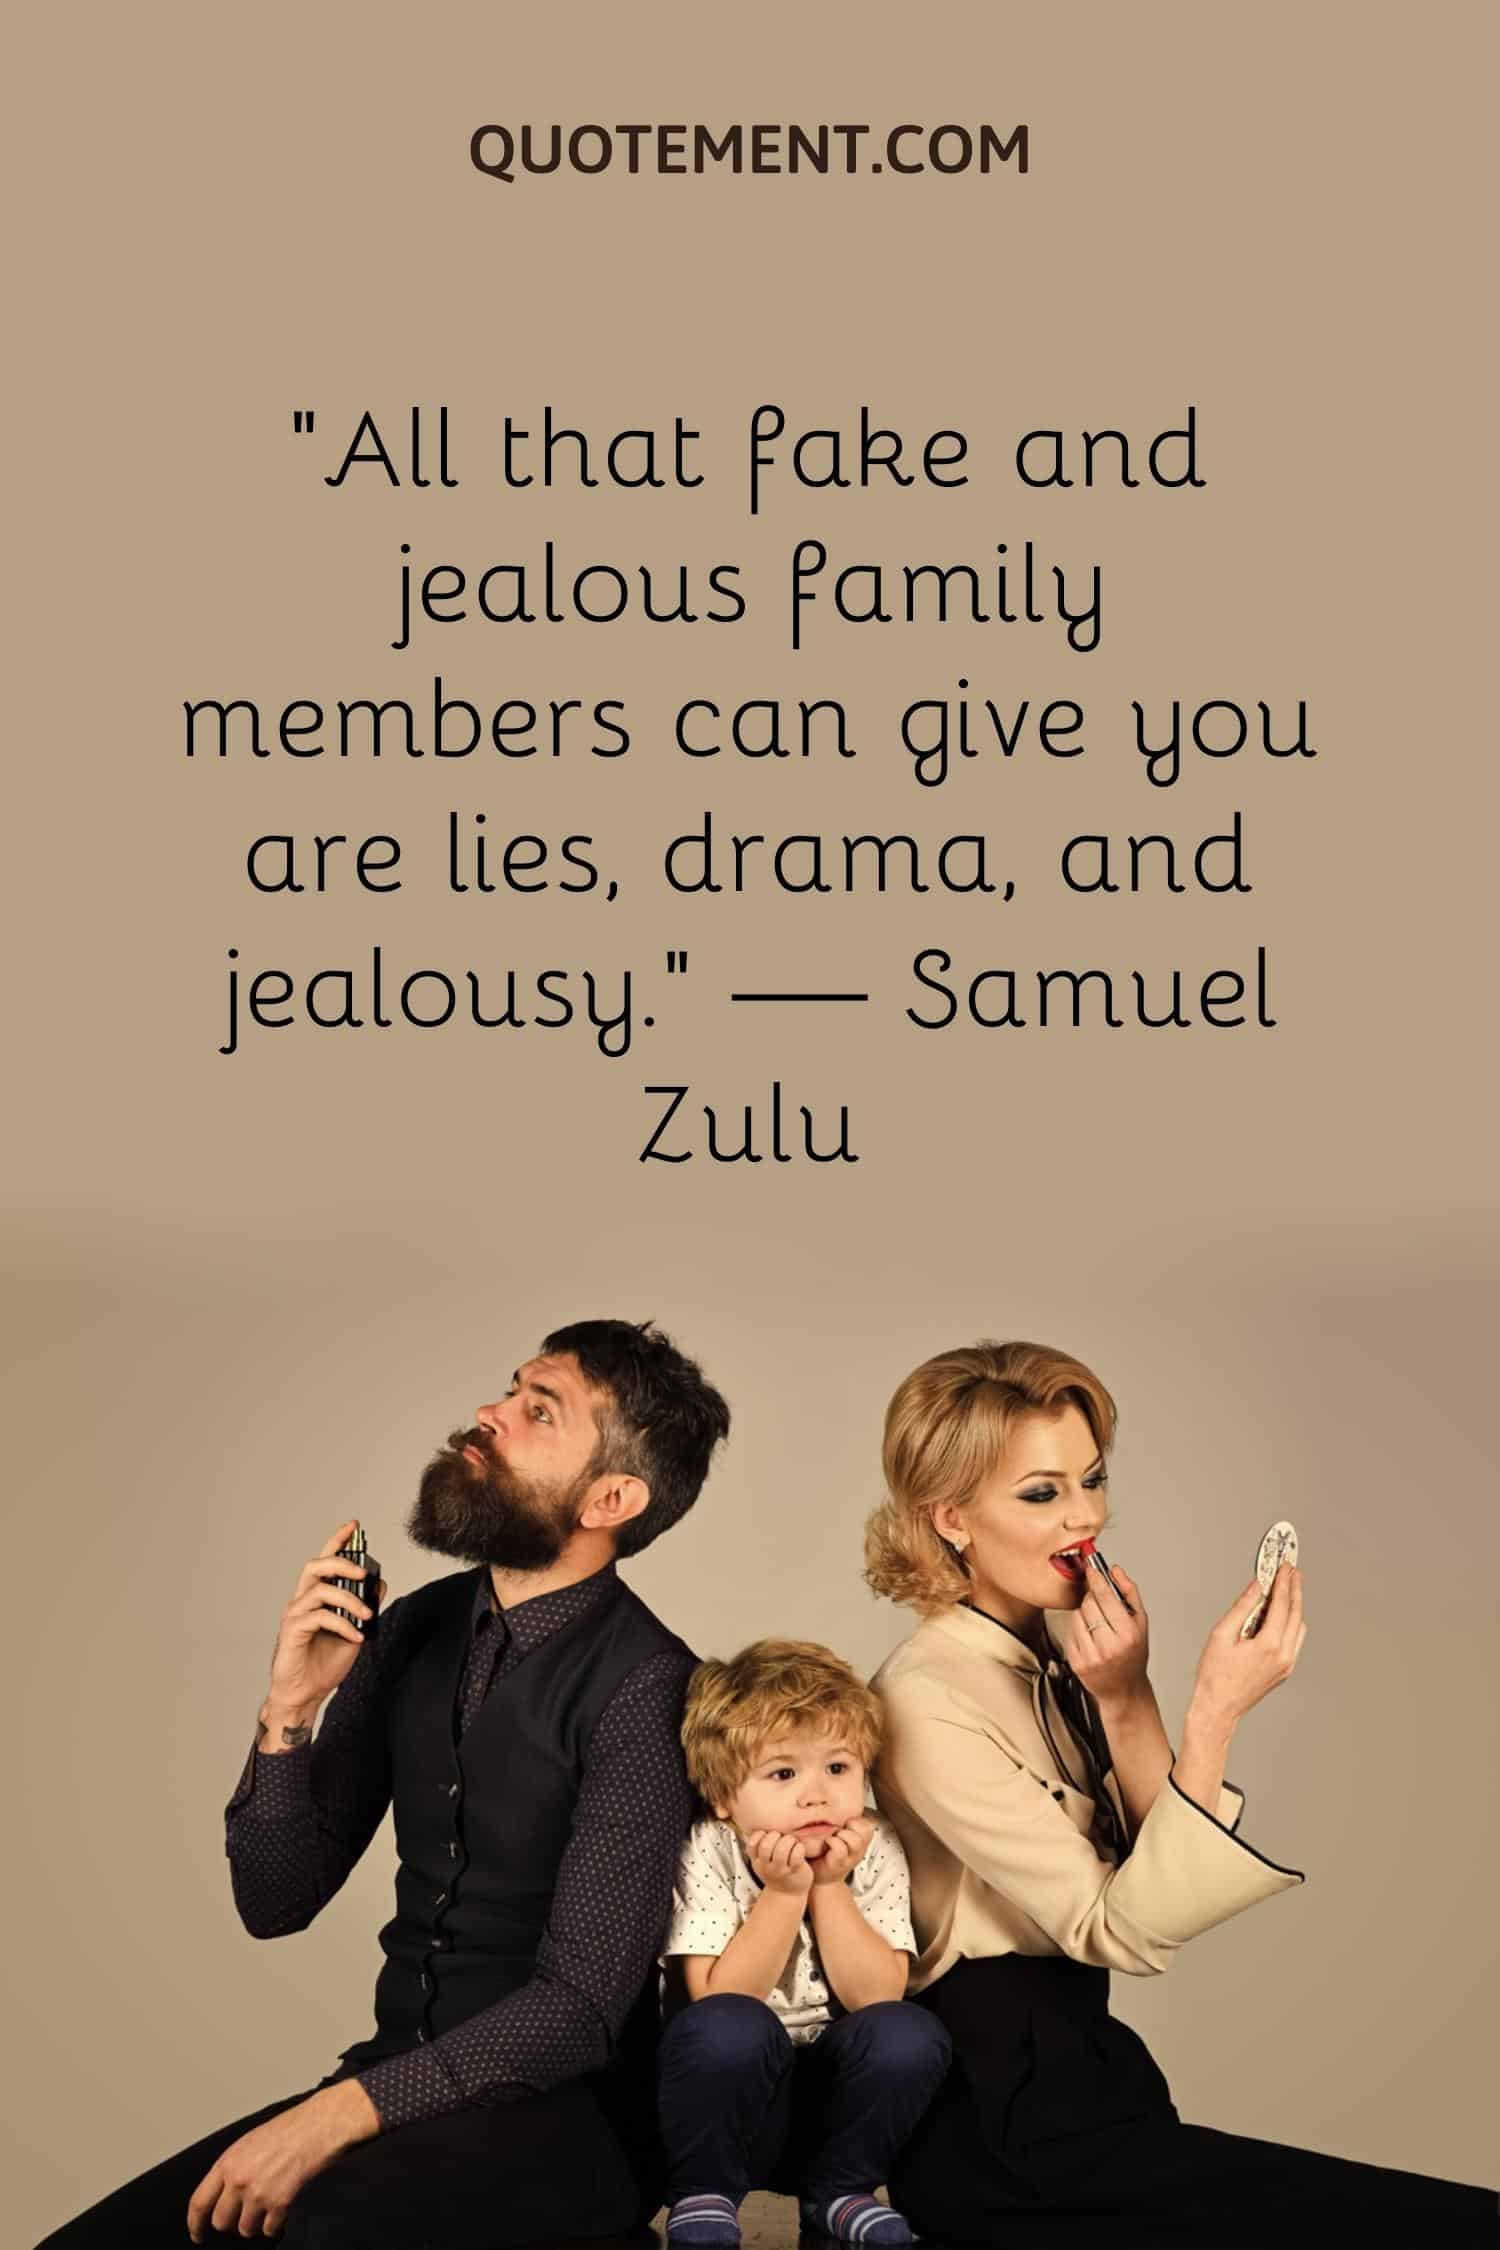 All that fake and jealous family members can give you are lies